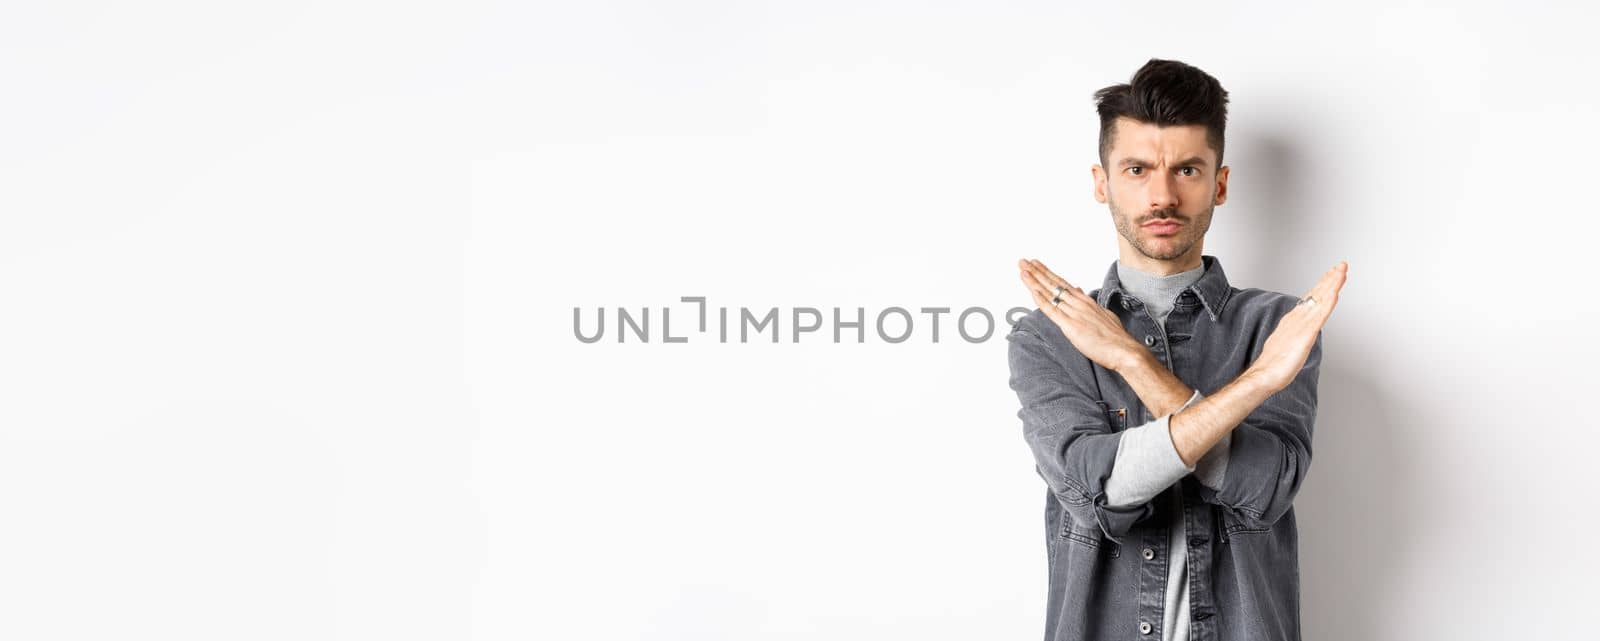 Angry man show cross gesture to stop or say no, frowning and looking serious, disagree and prohibit bad situation, standing on white background.